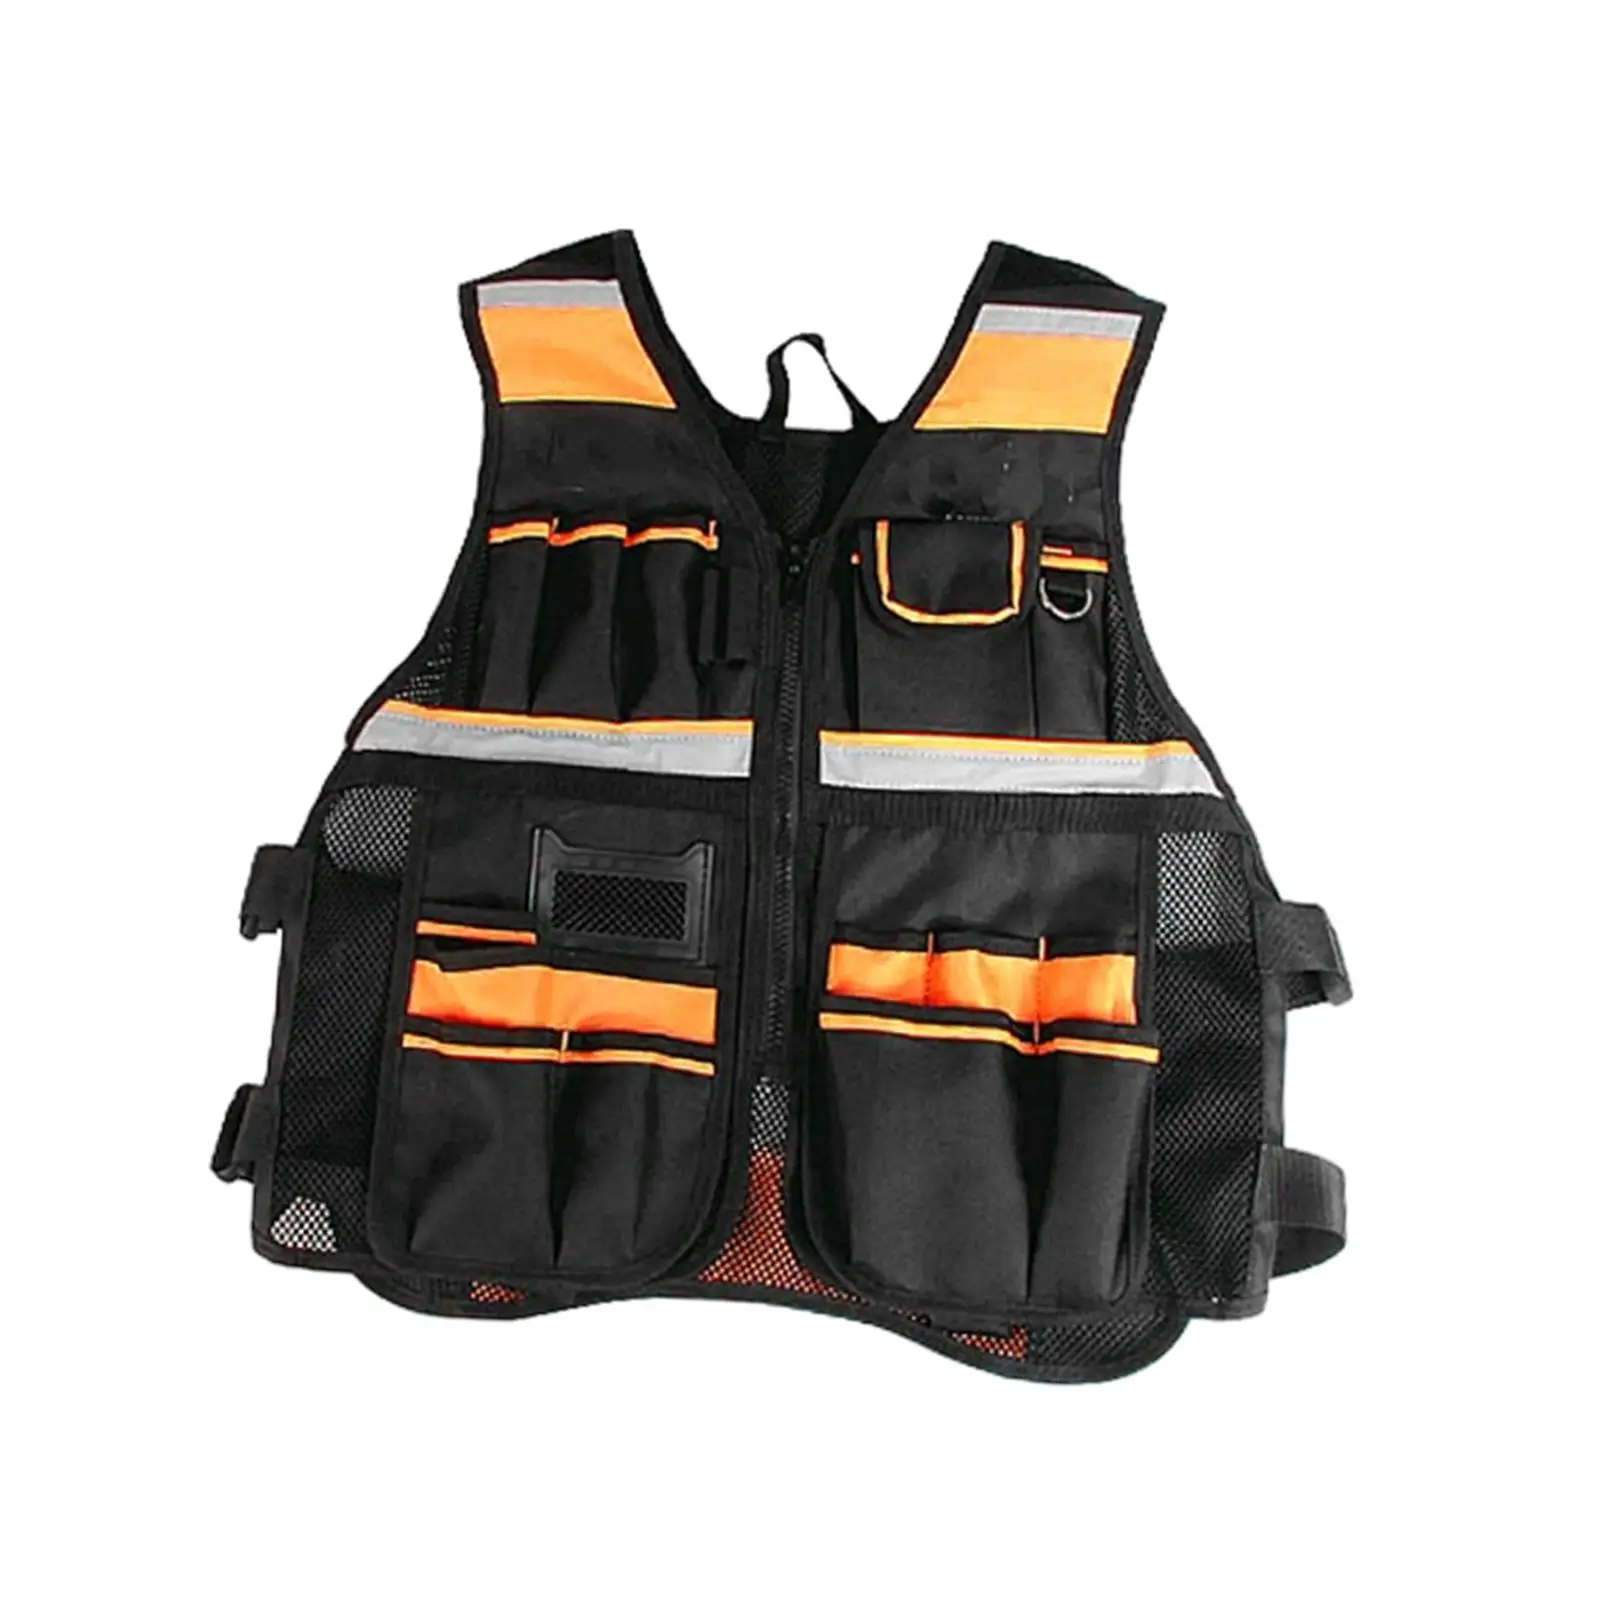 Tool Vest Electrician Carpenters Reflective Mesh Adults Convenient Access Multi Pockets for Industrial Construction Outdoor Work